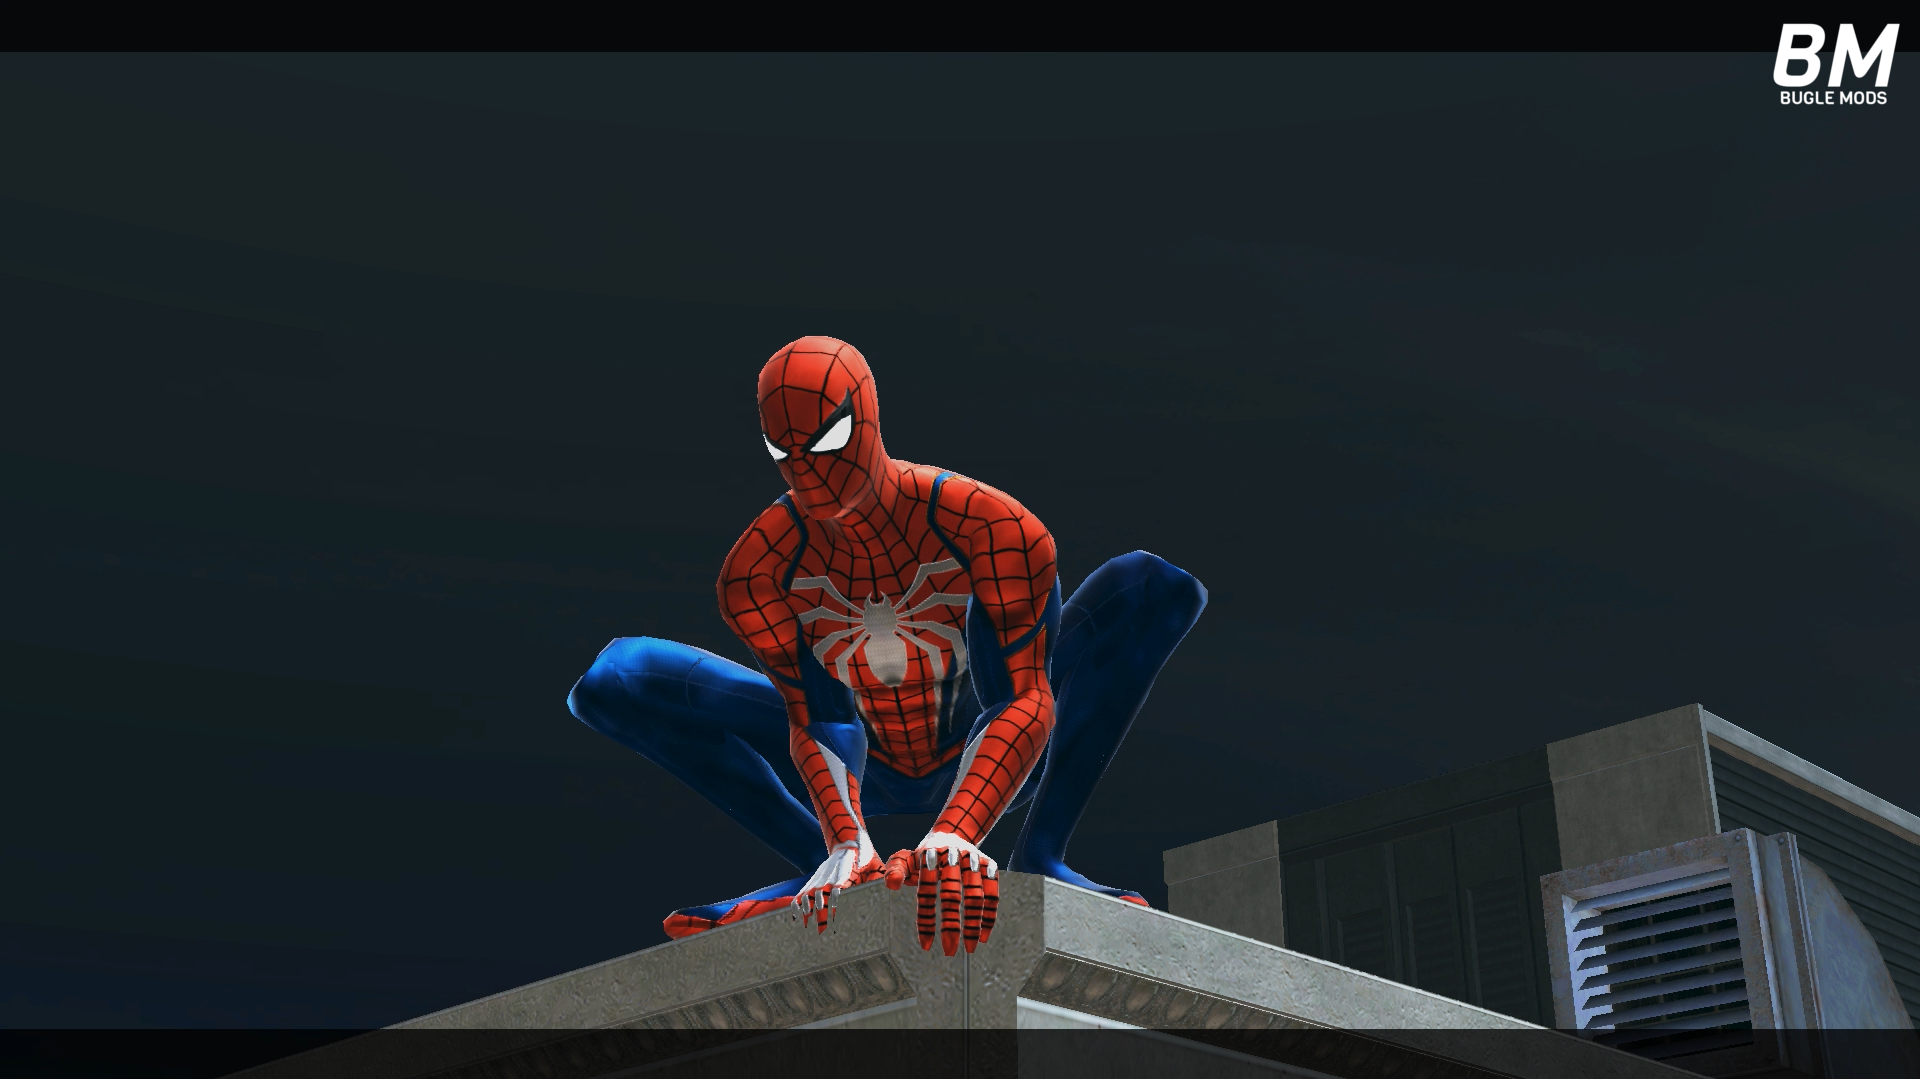 Image 3 - Spider-Man: Web Of Shadows Mods for Spider-Man: Web Of Shadows Mod DB